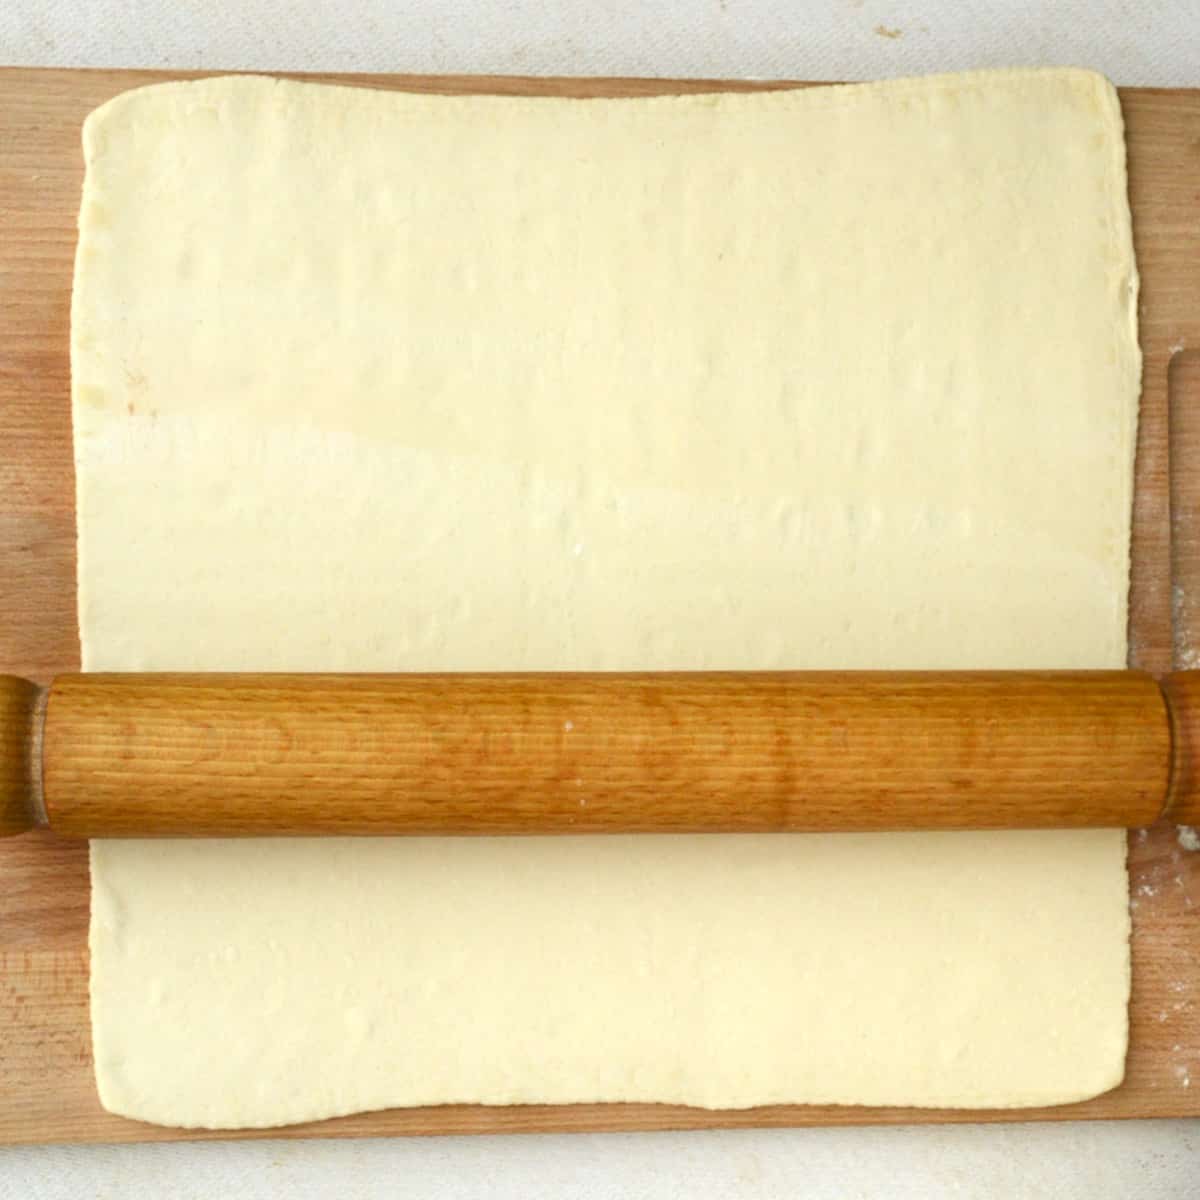 Puf pastry is rolled out on a wooden board using a rolling pin.